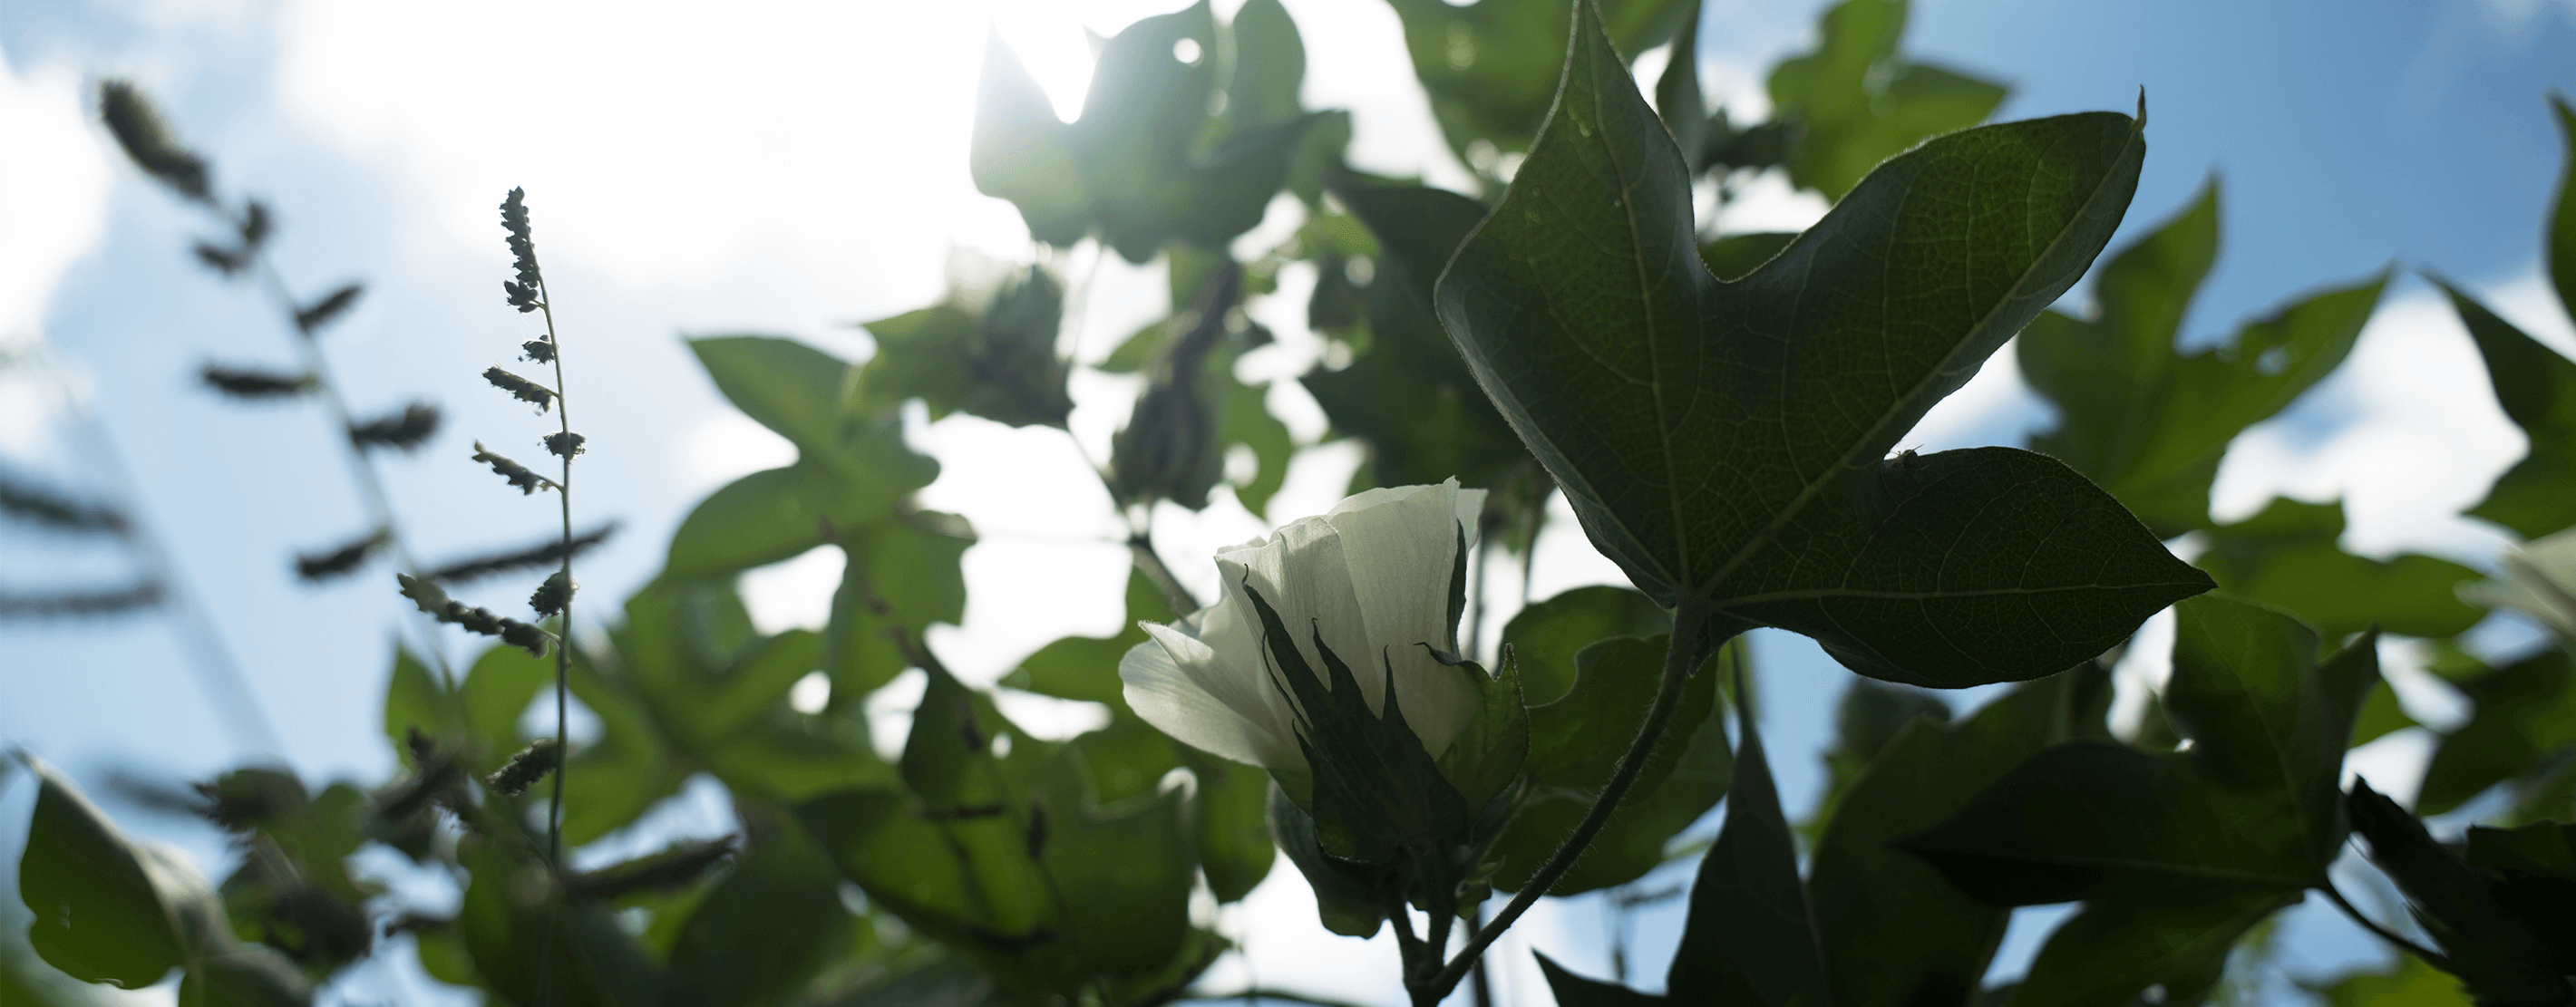 A Cotton Plant Blooming In Texas